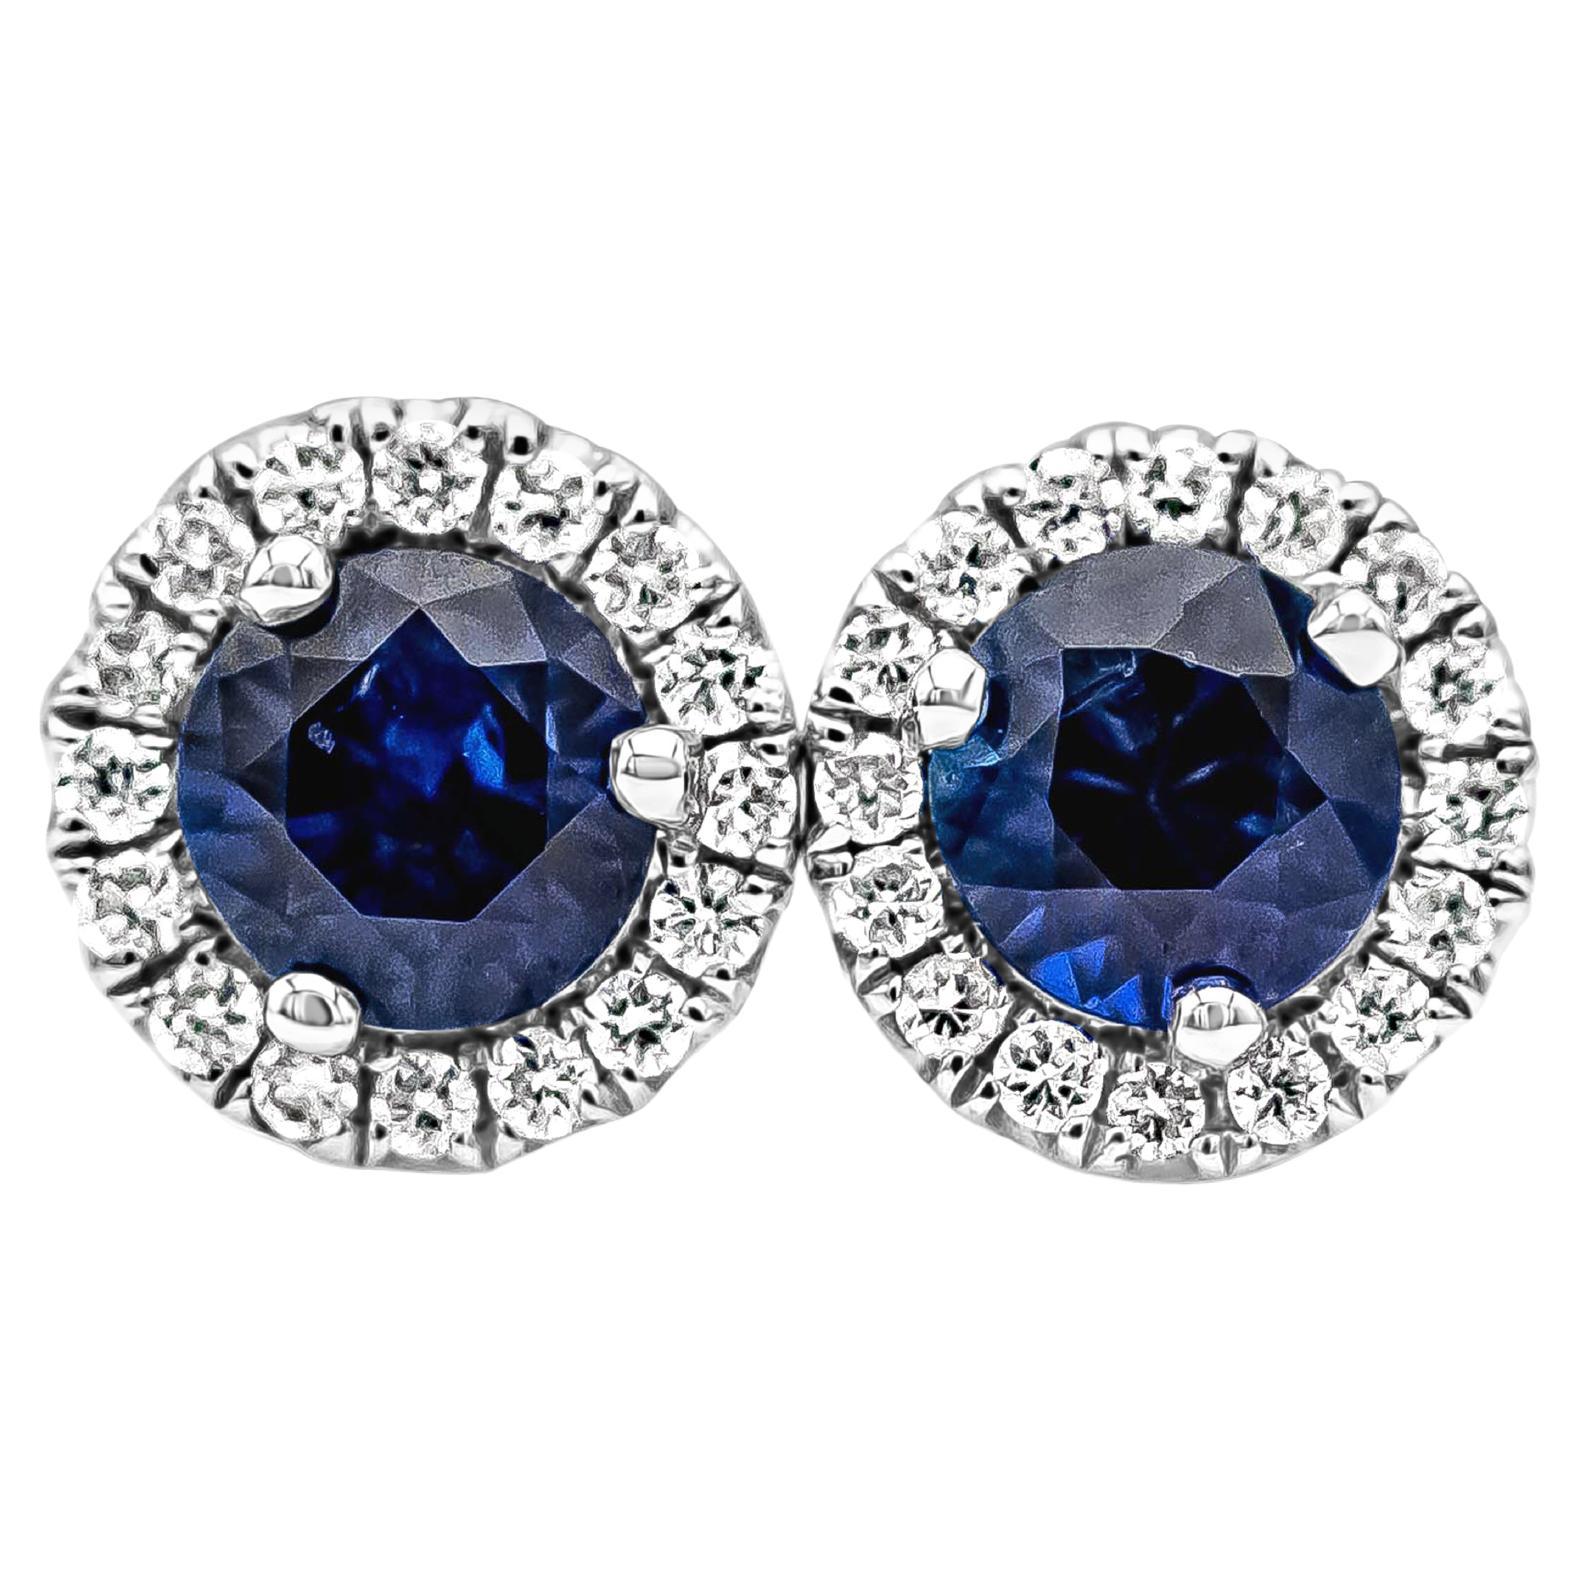 GIA Certified 0.64 Carats Total Blue Sapphire and Diamond Halo Stud Earrings For Sale